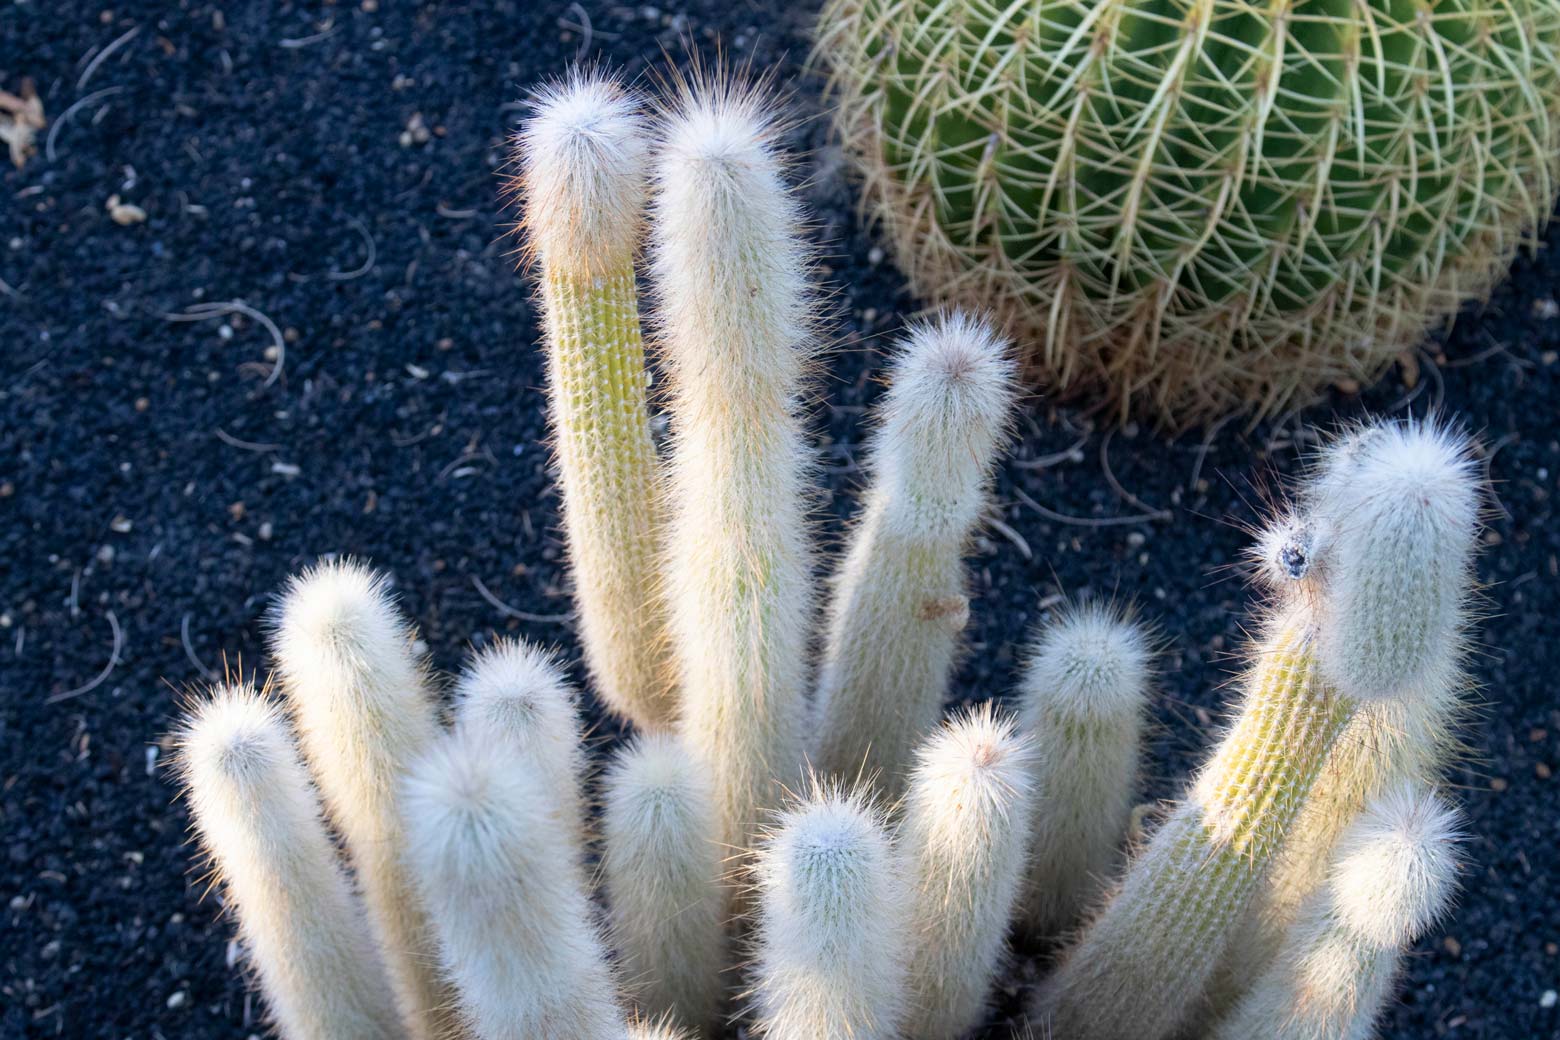 A Silver Torch cactus in the specimen bed.